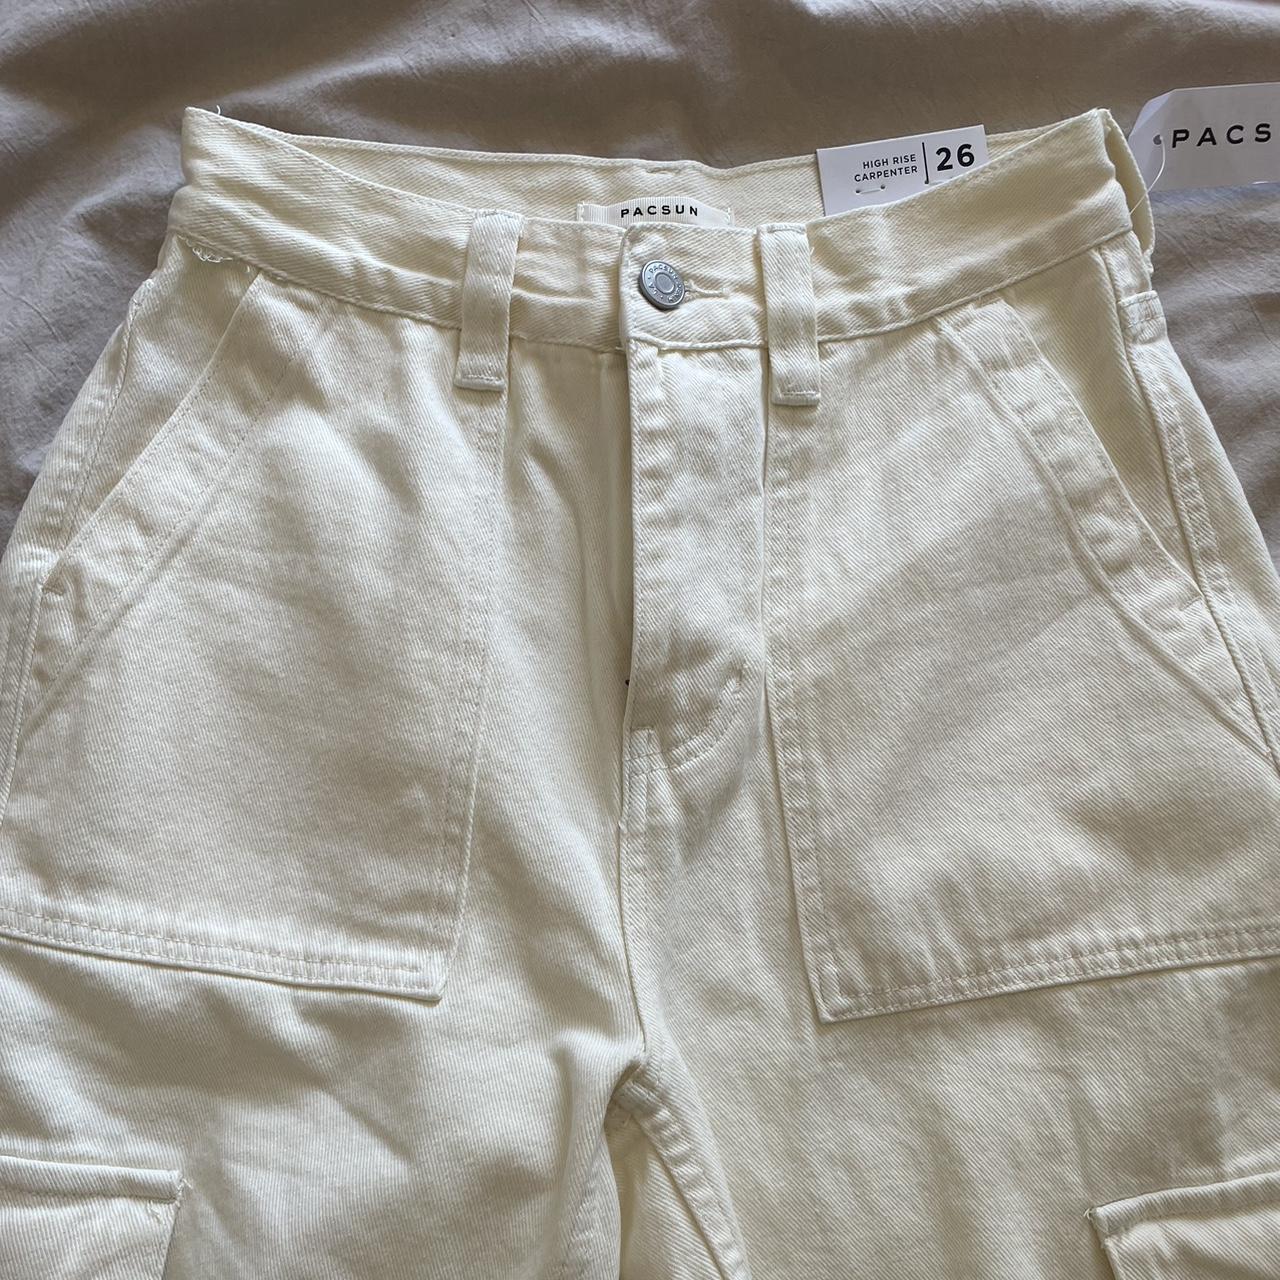 PacSun Women's Cream and White Trousers | Depop